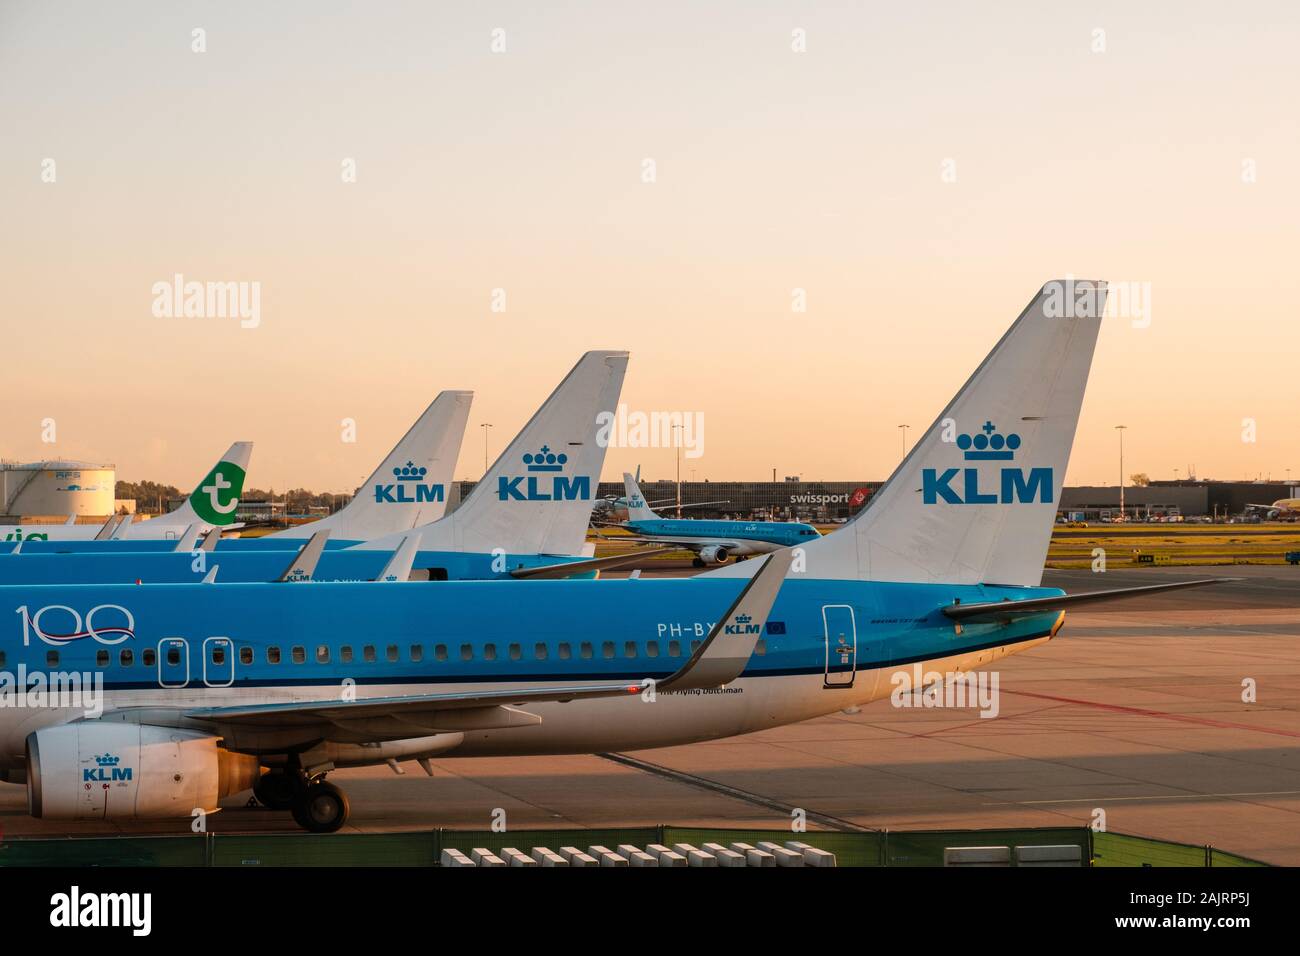 Amsterdam, Netherland - December, 2019: KLM Airline airplanes on airport in Amsterdam Stock Photo